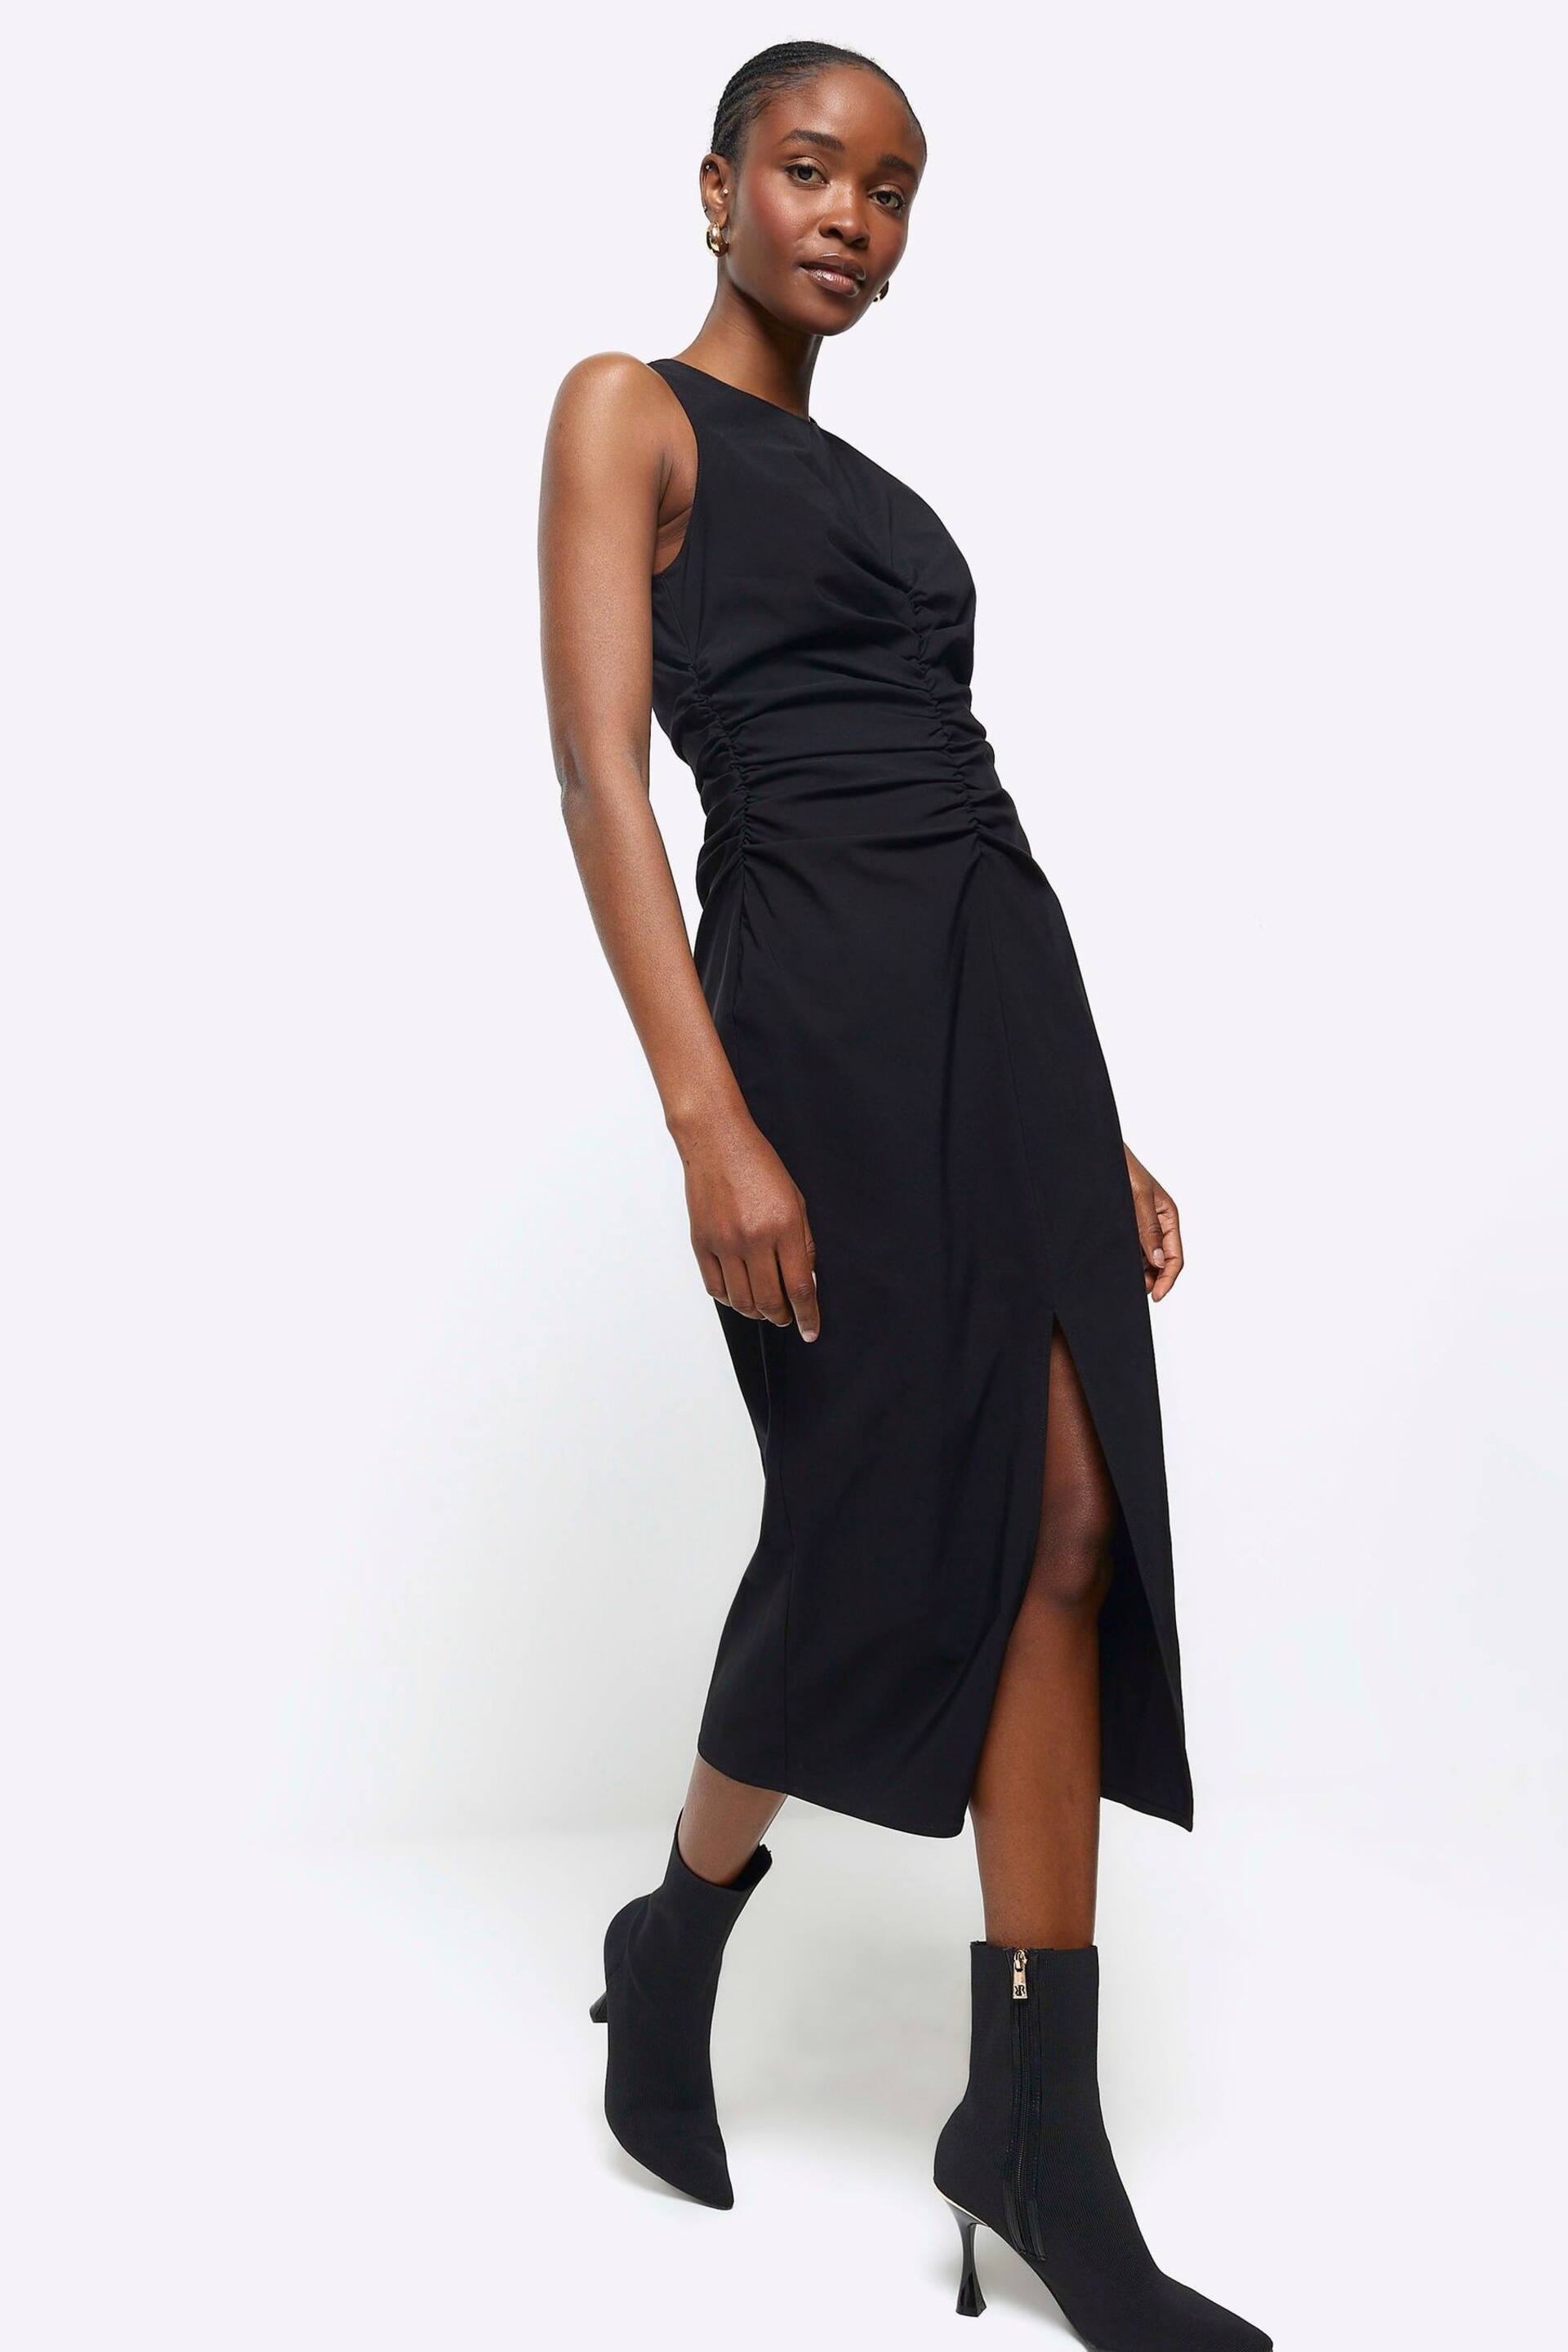 River Island Black Sleeveless Ruched Detail Dress - Image 3 of 4